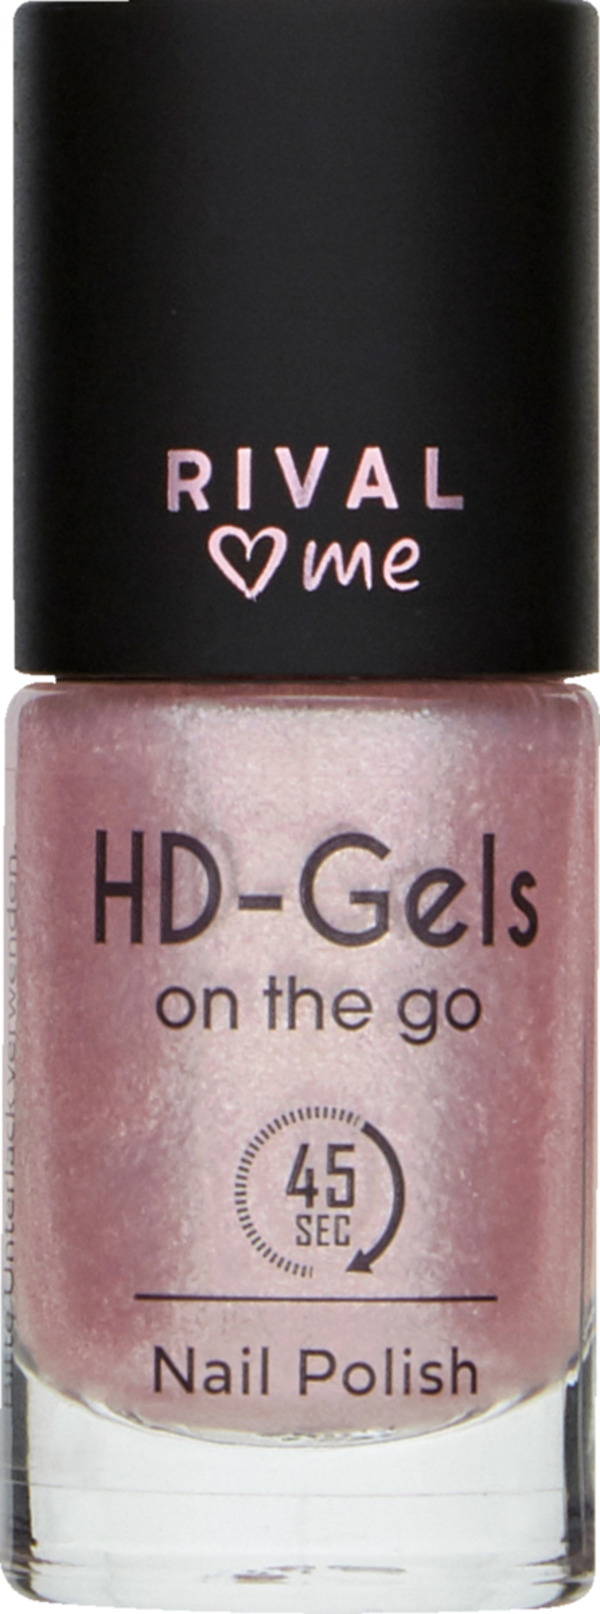 Bild 1 von RIVAL loves me HD-Gels on the go 06 shiny star